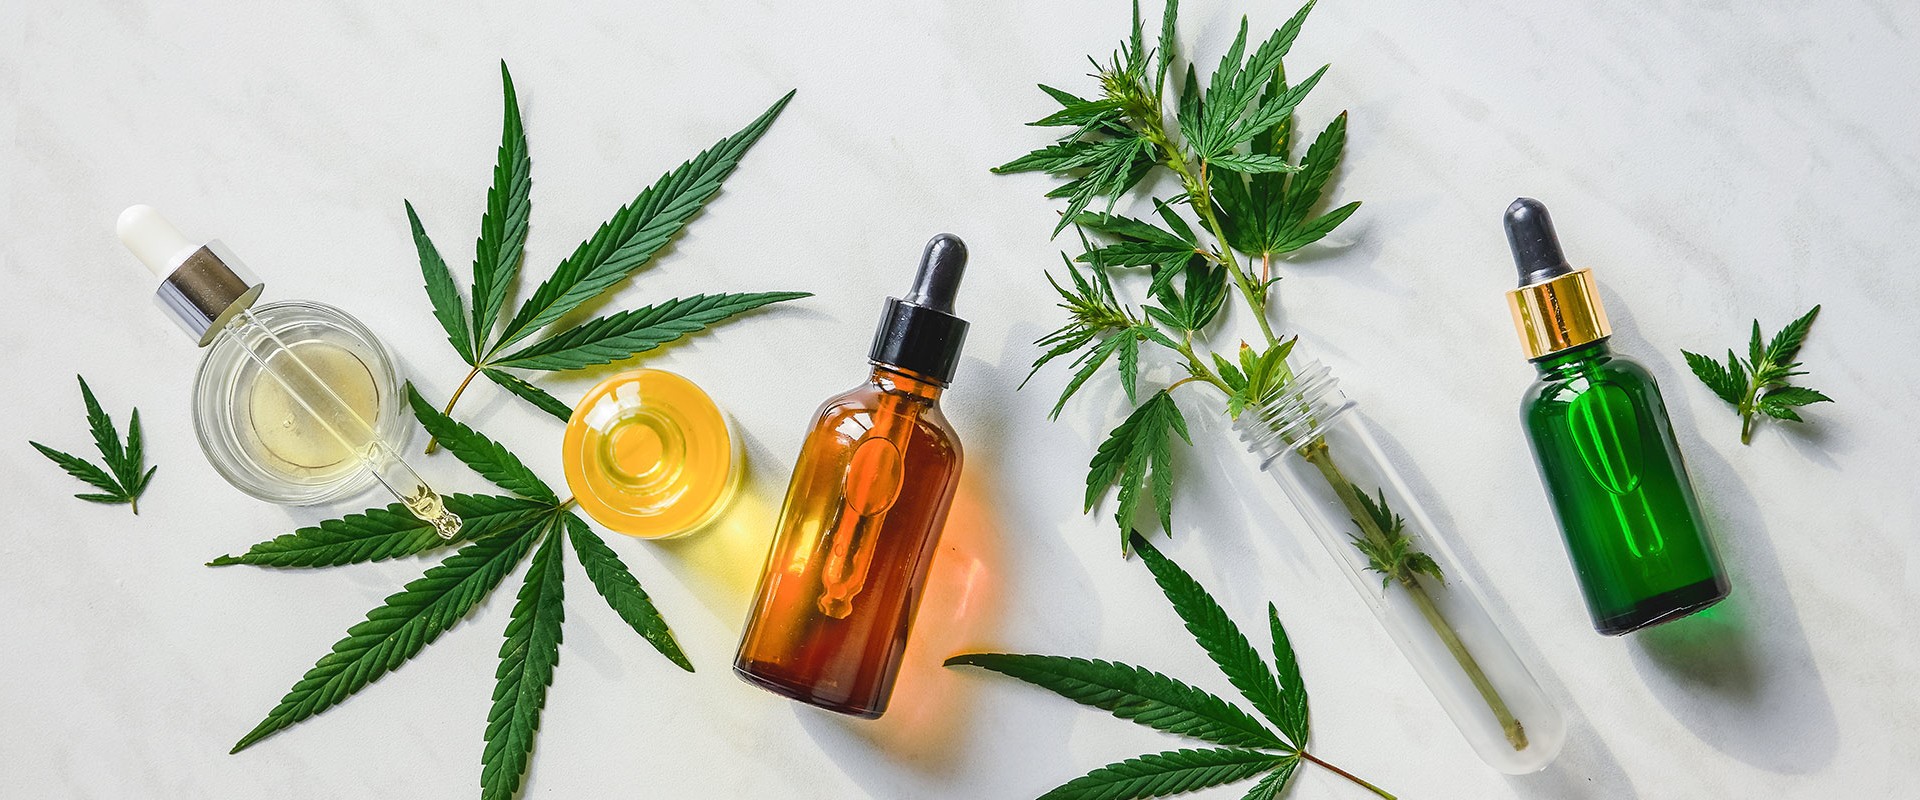 What happens when stop taking cbd oil?